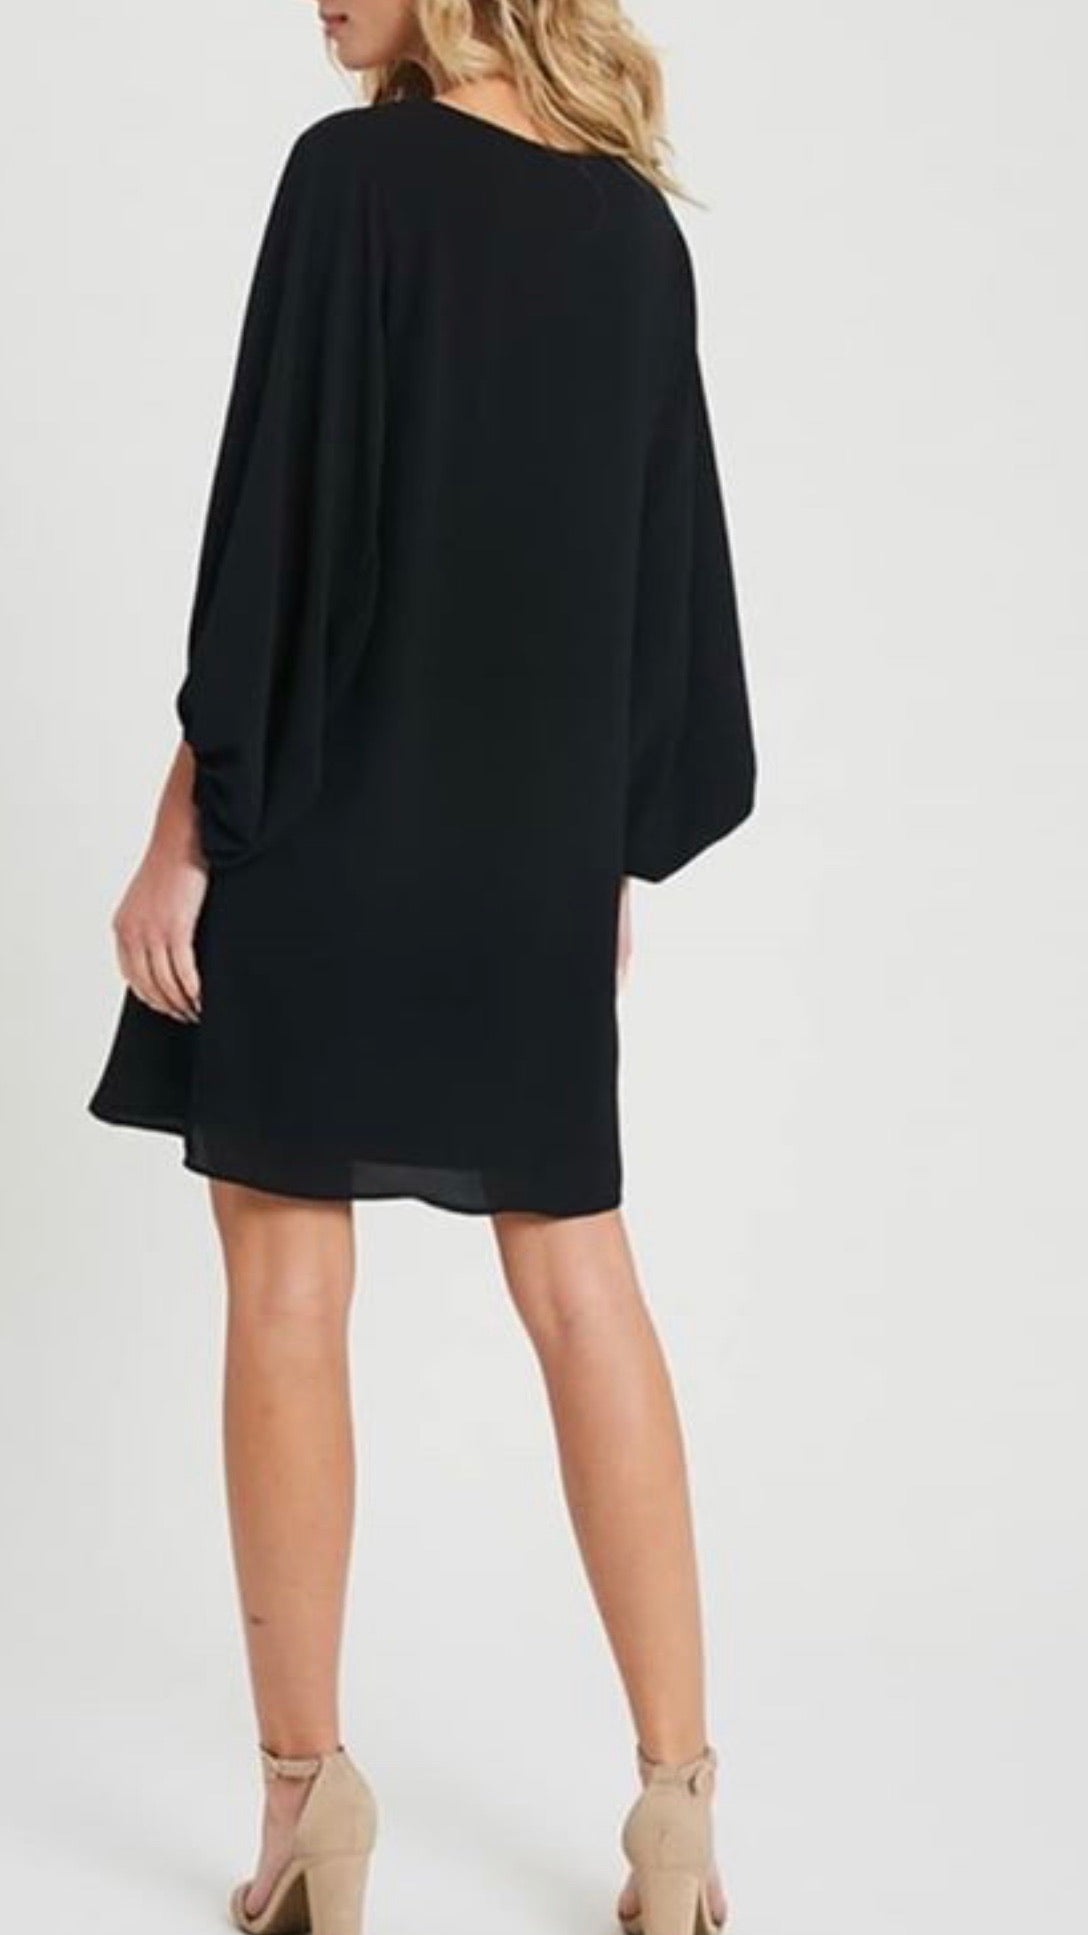 Chrissie V-neck Bubble Sleeve Dress - Corinne an Affordable Women's Clothing Boutique in the US USA